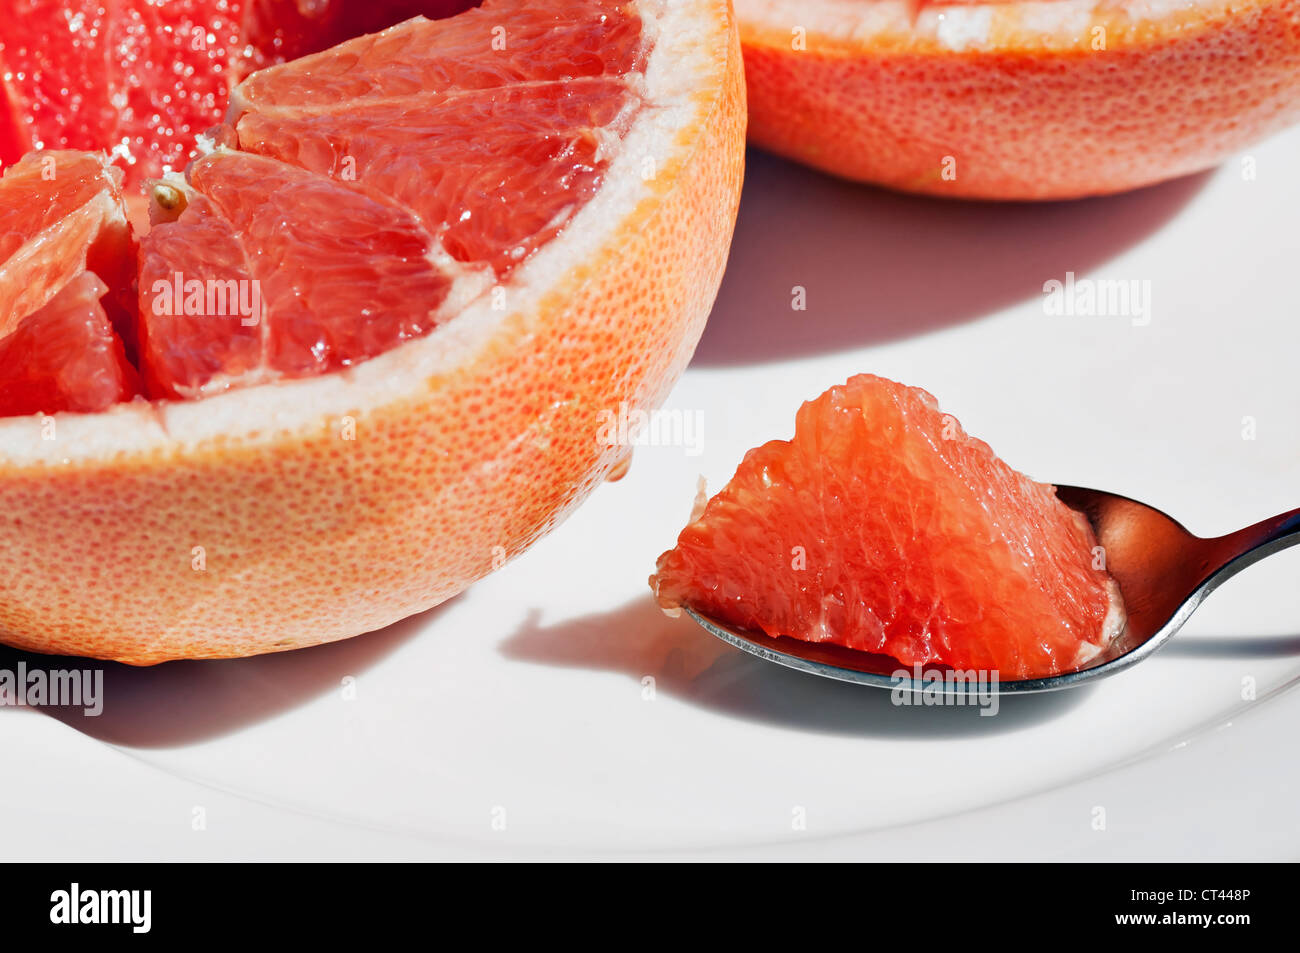 A bite of fresh juicy grapefruit on a spoon rests on a plate next to a halved grapefruit. Stock Photo